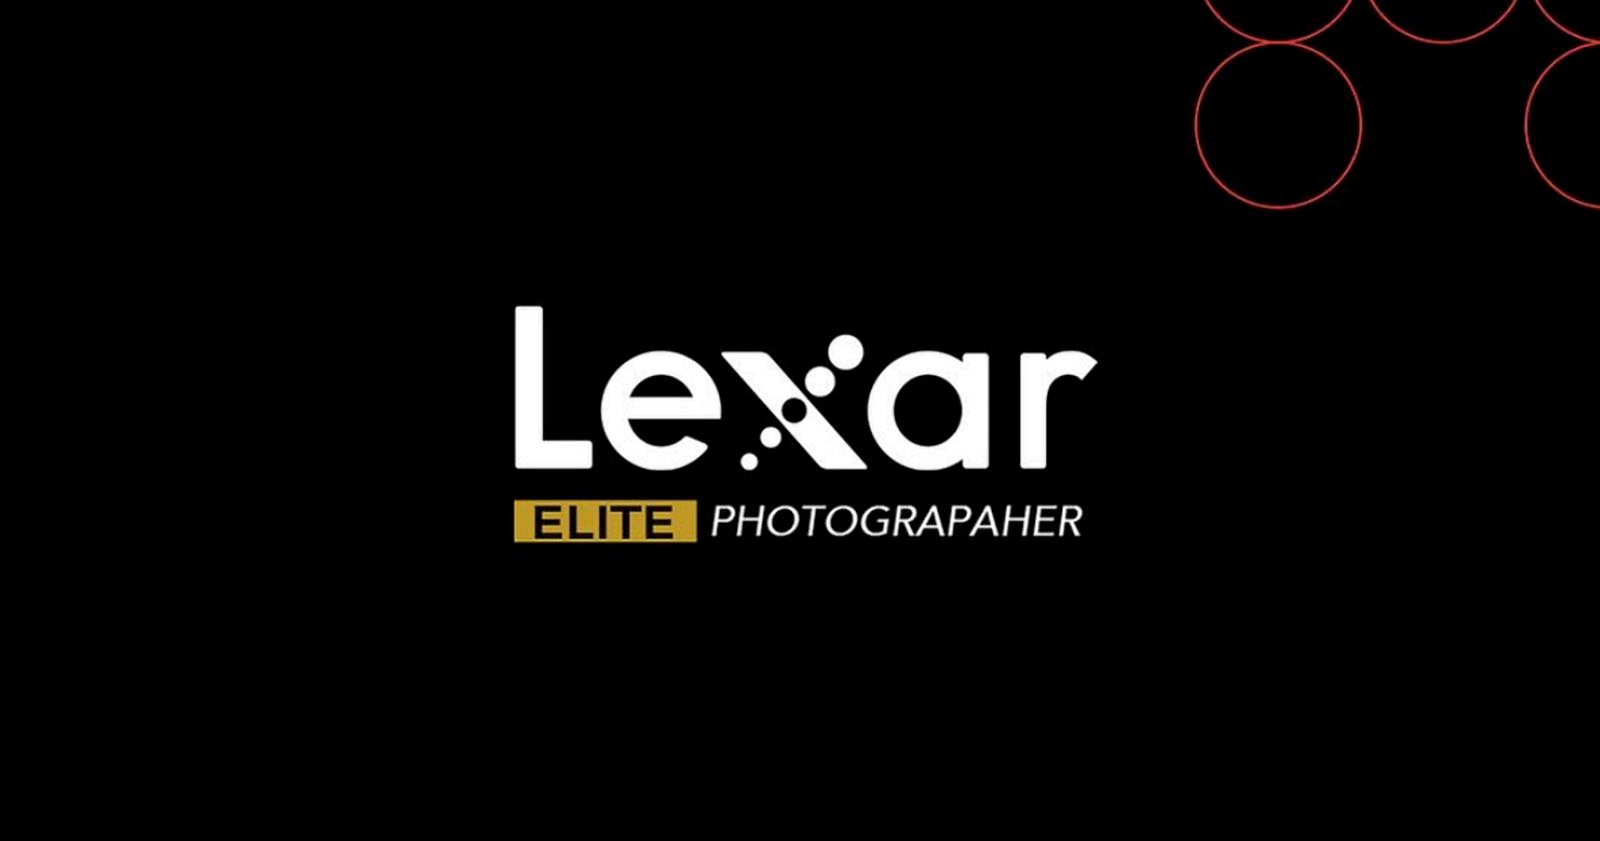 Lexars Elite Photographers Roster Was Entirely Men and Thats Absurd